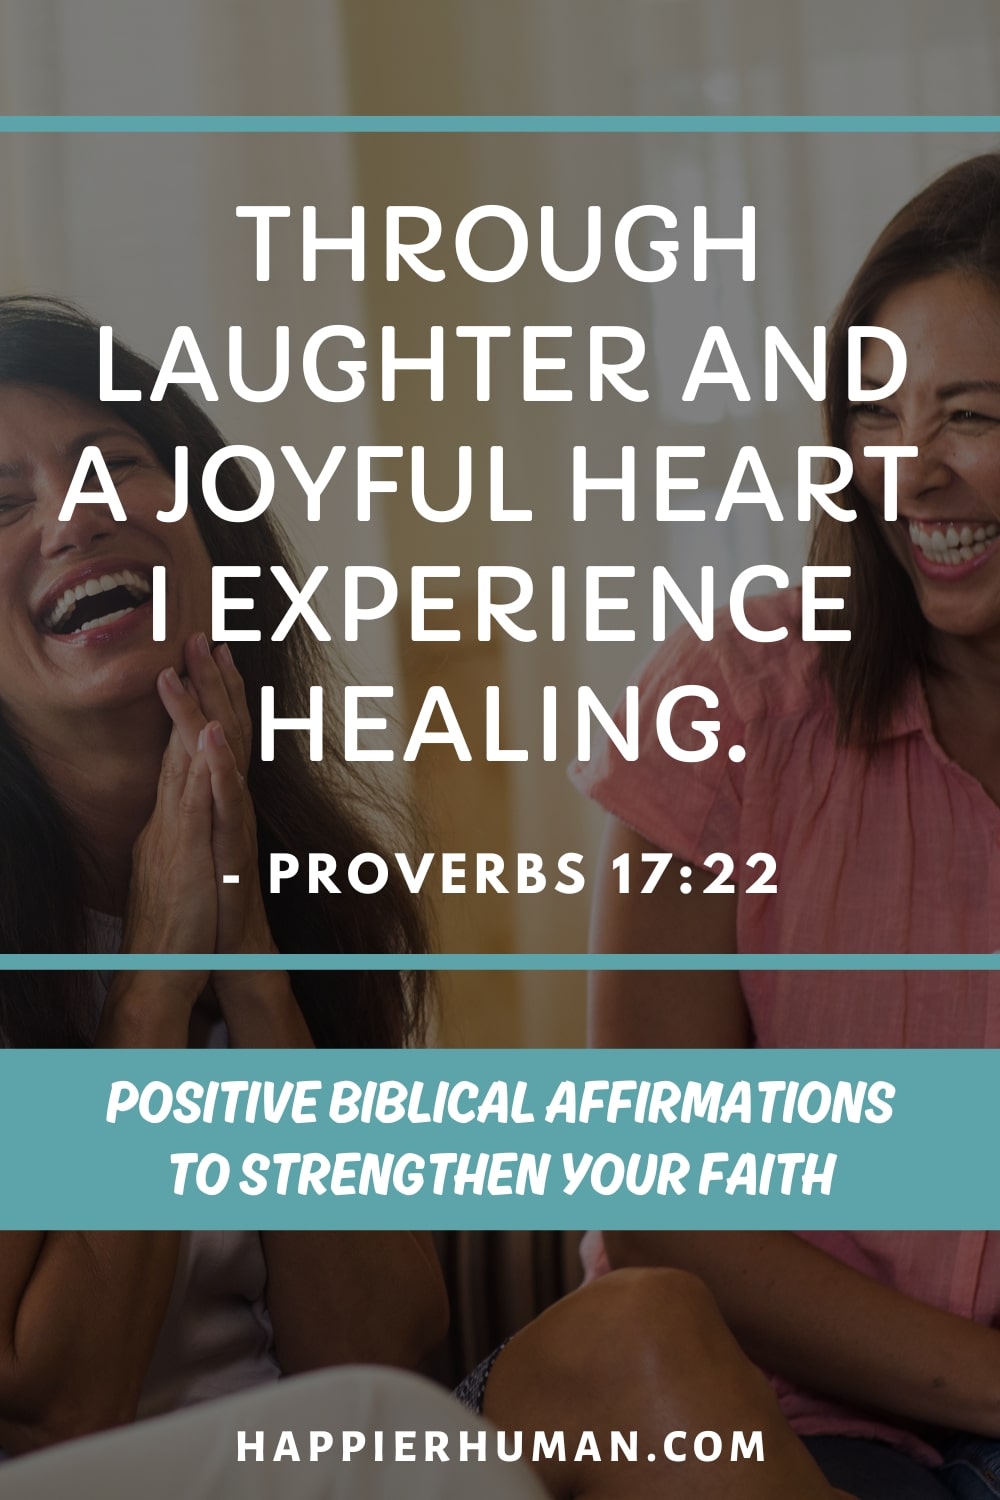 biblical affirmations | biblical affirmations to decree over your life | daily biblical affirmation